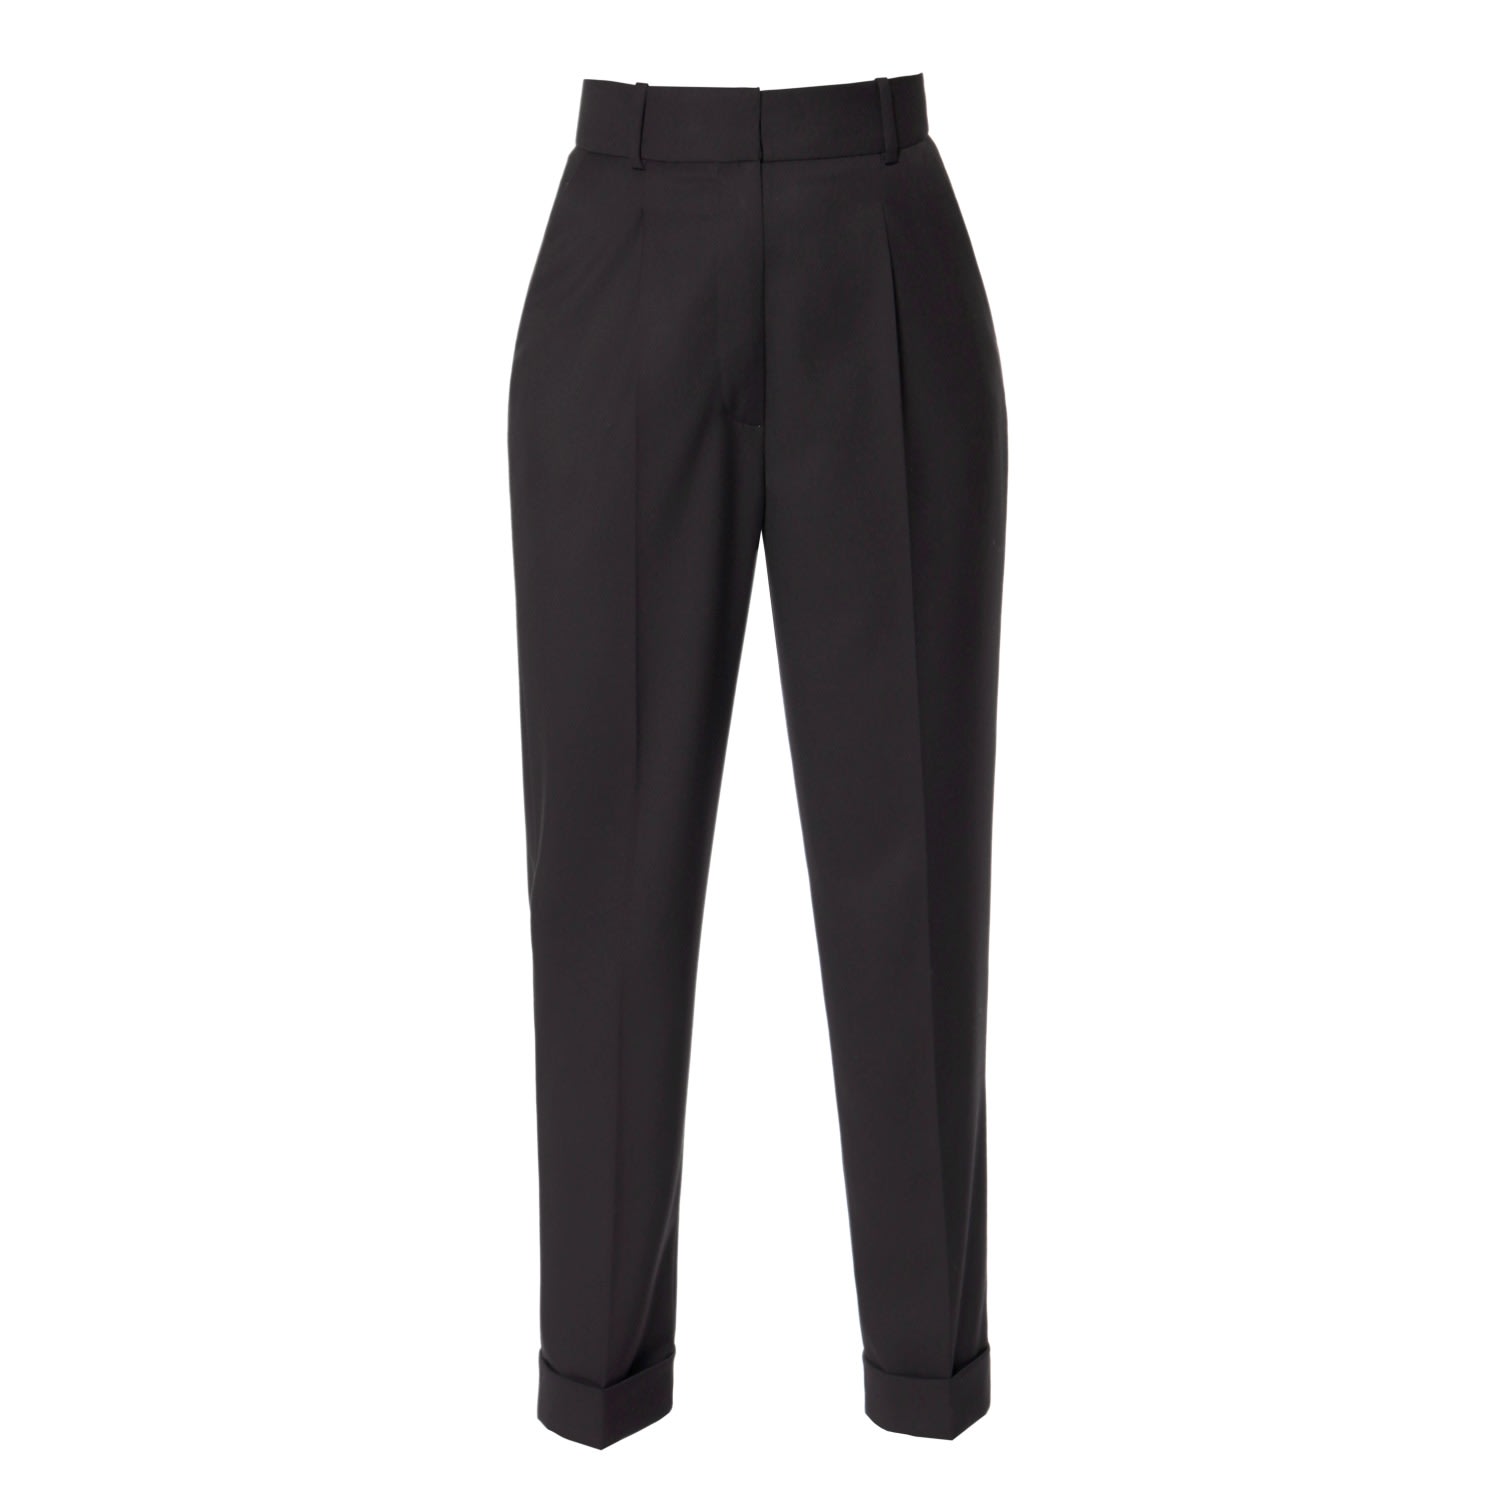 Aggi Women's Kelly Rich Black Tailored Trousers With Cuffs